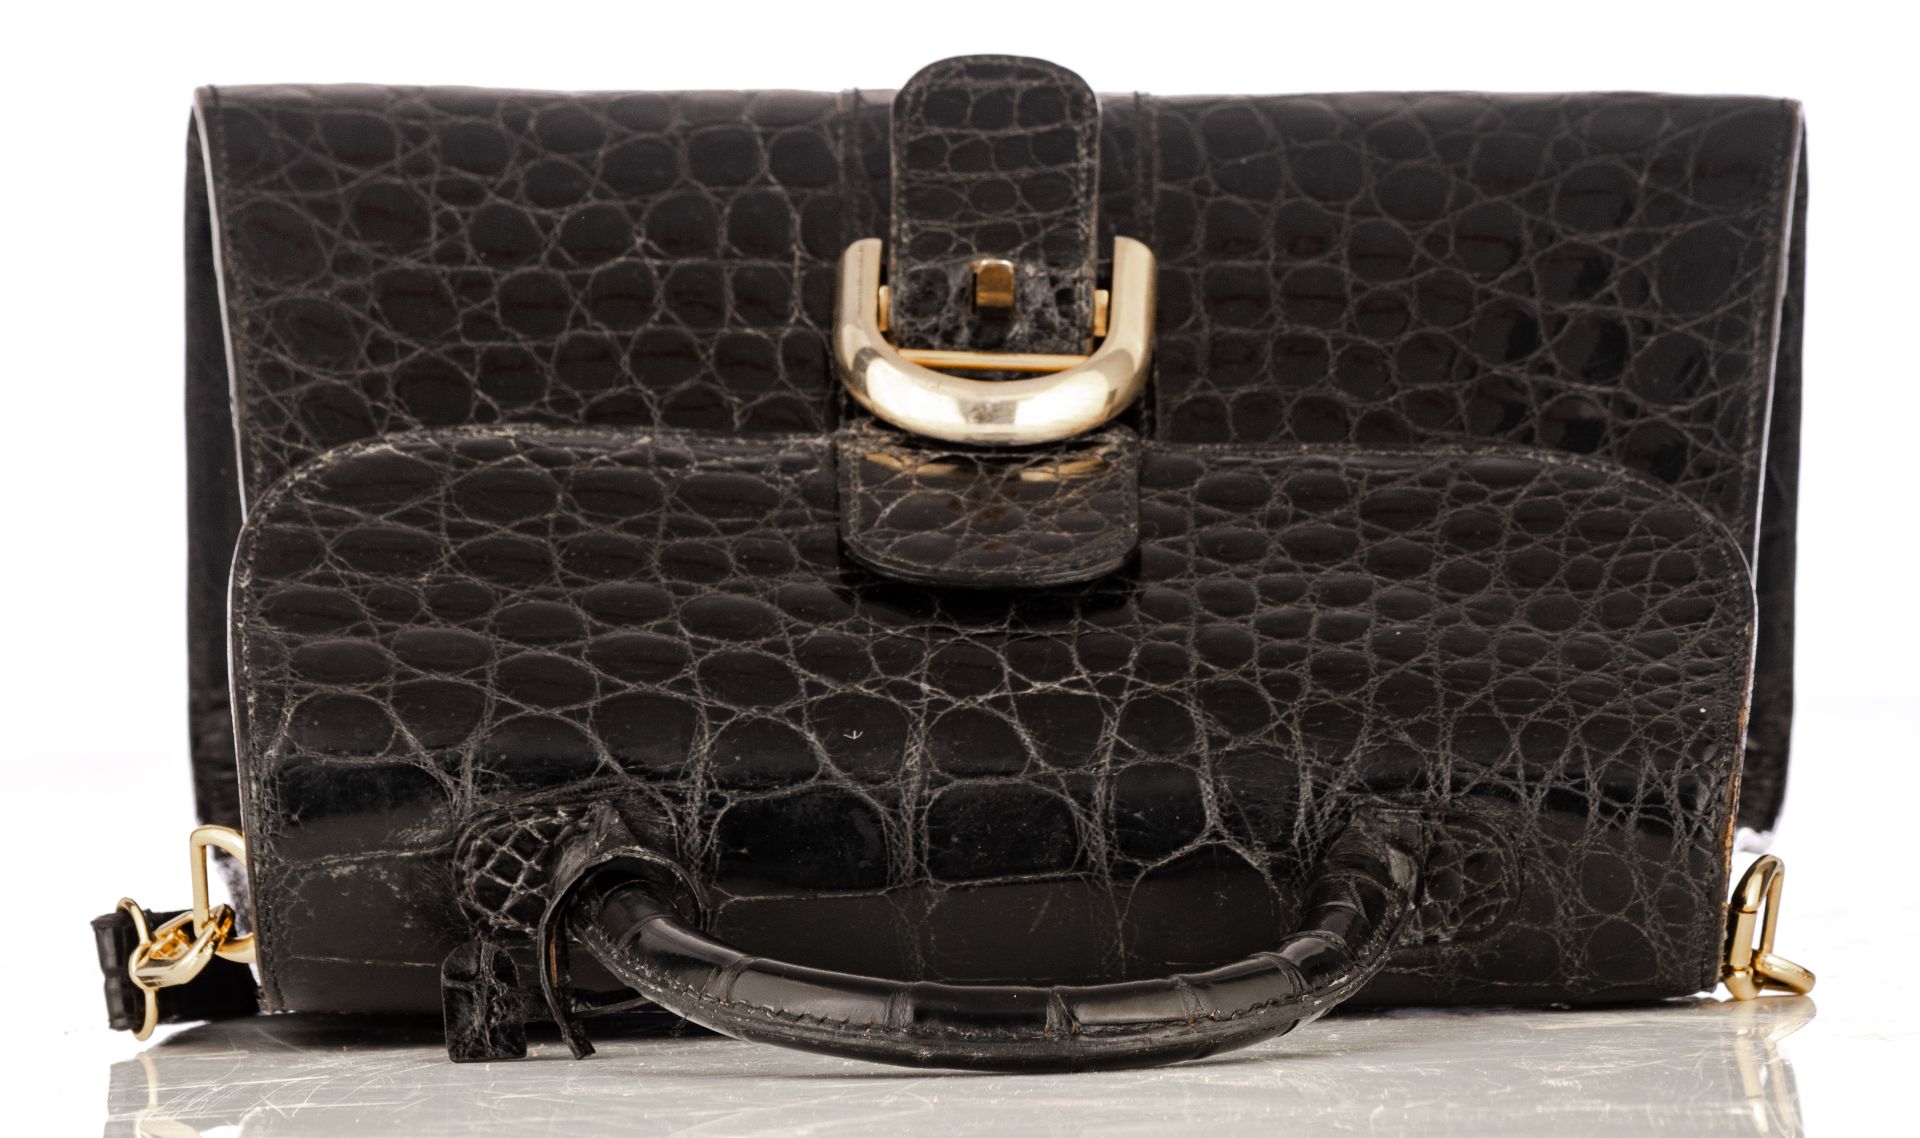 A Delvaux Brilliant handbag in black croco, 1977, with the original certificate and dustbag, H 21 x - Image 6 of 12